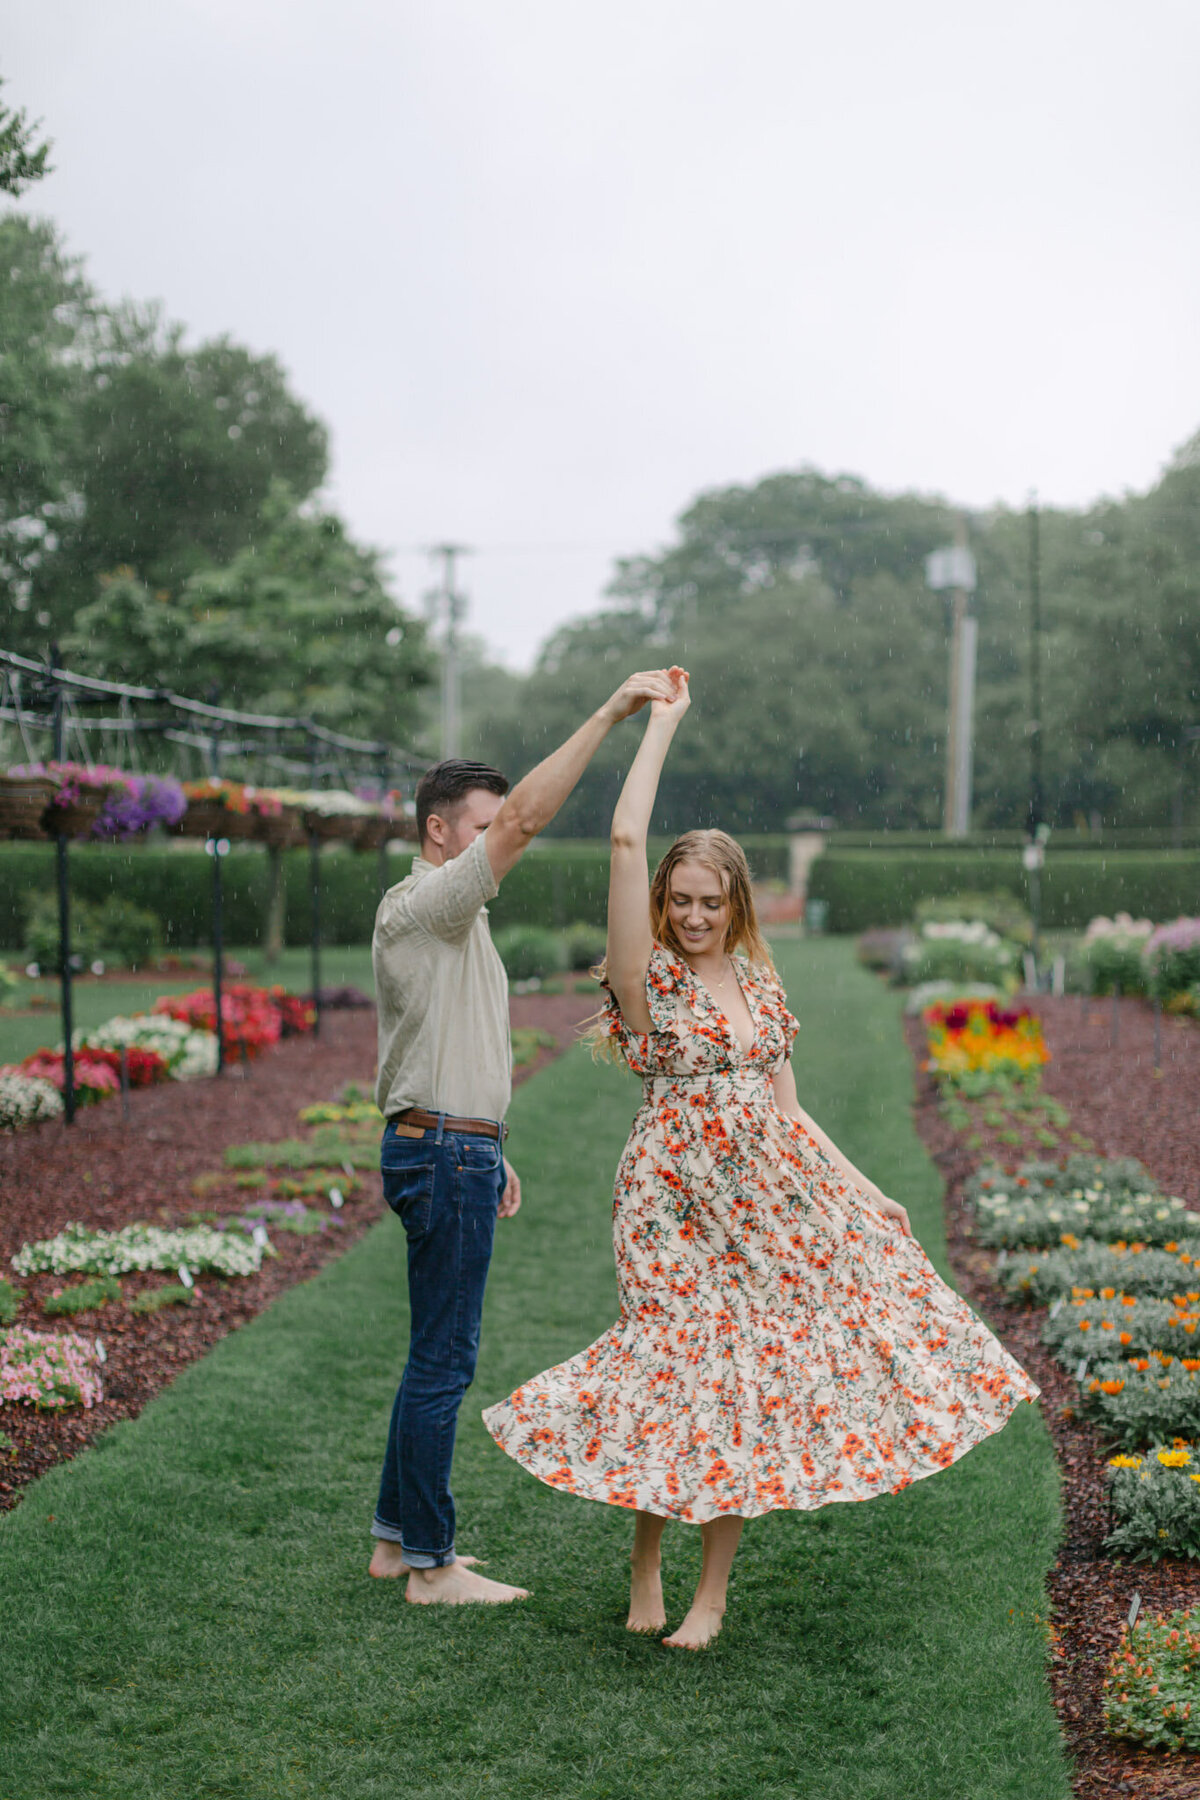 rainy day engagement photos in Dallas, Texas